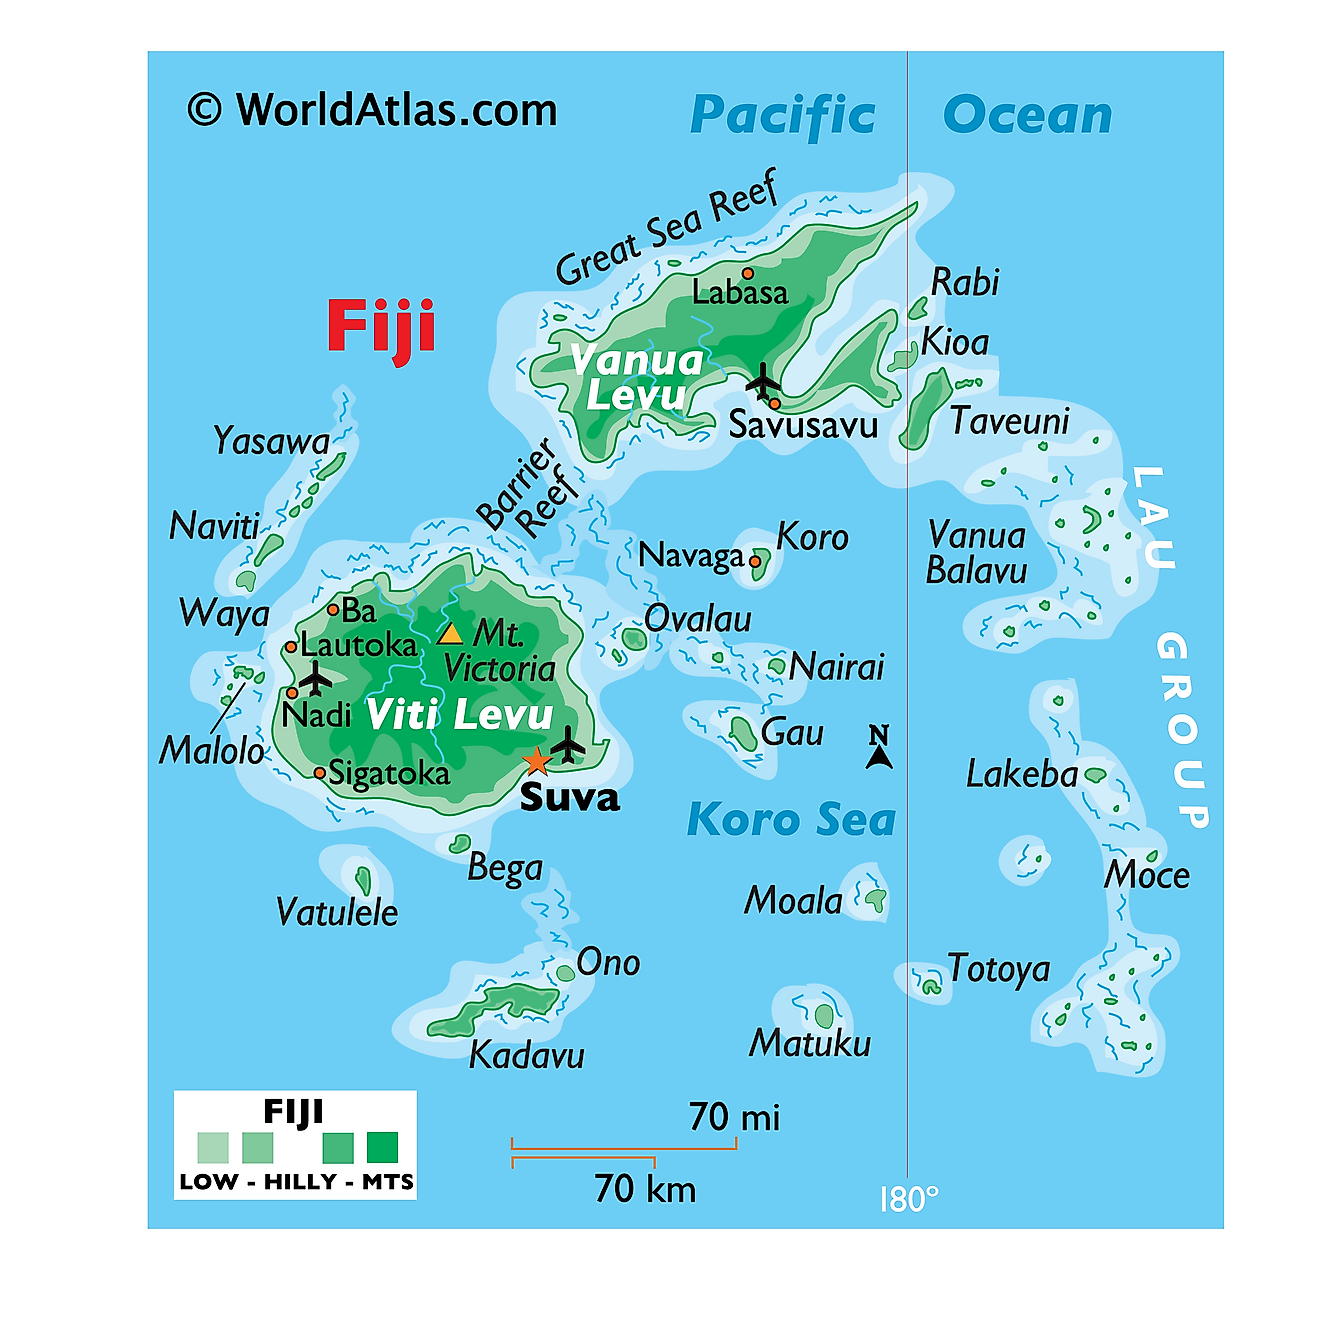 Physical Map of Fiji showing islands, relief, Mount Victoria, important settlements, etc.